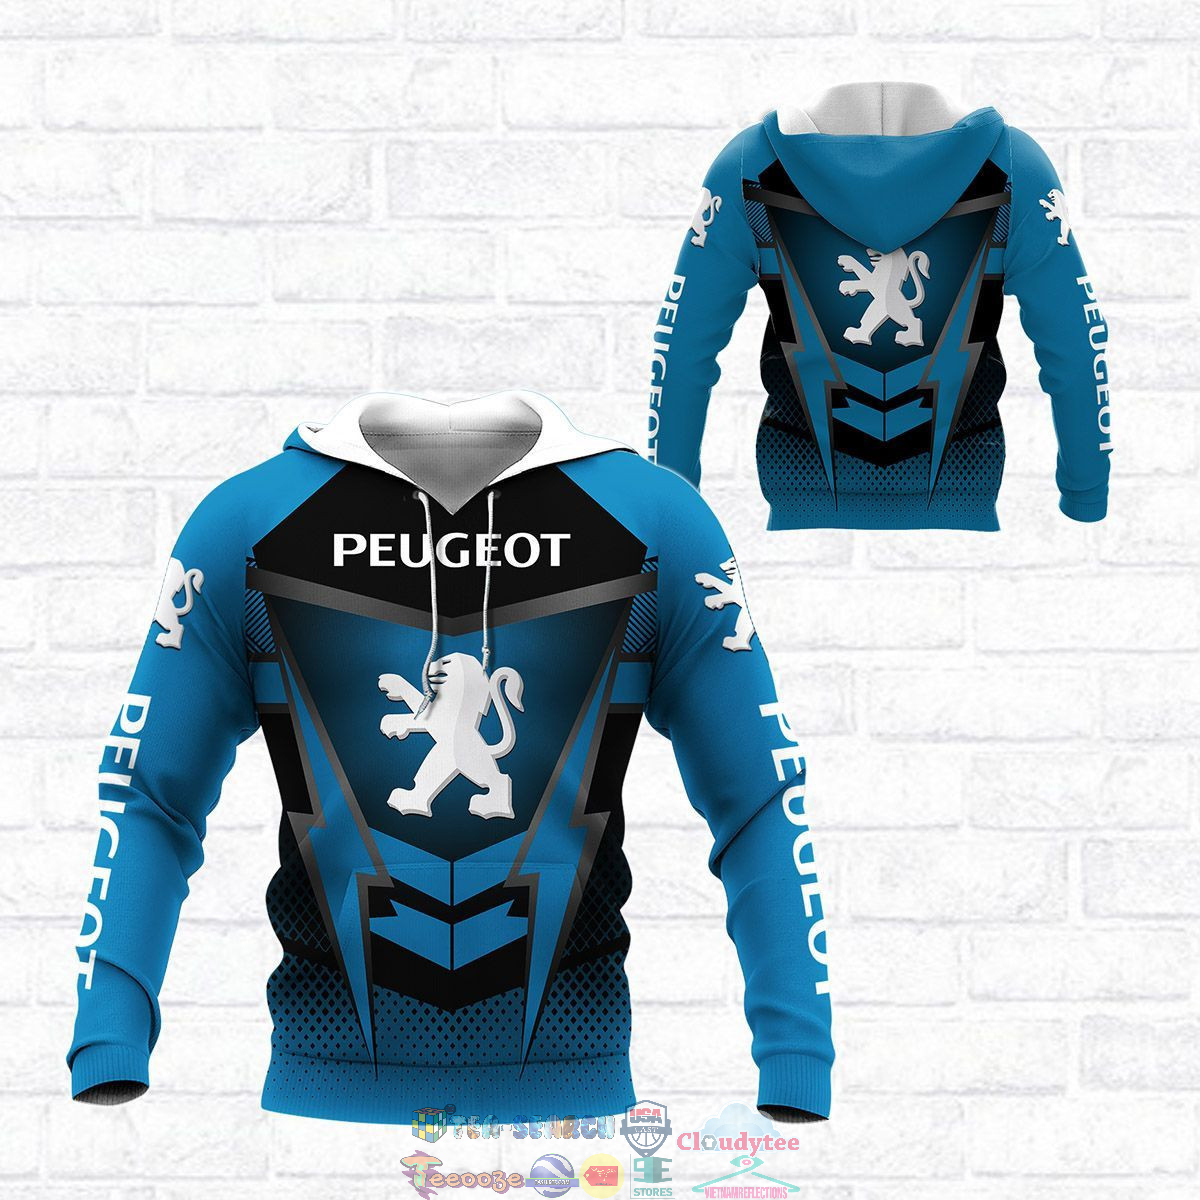 tyKGw6JE-TH170822-25xxxPeugeot-ver-4-3D-hoodie-and-t-shirt3.jpg